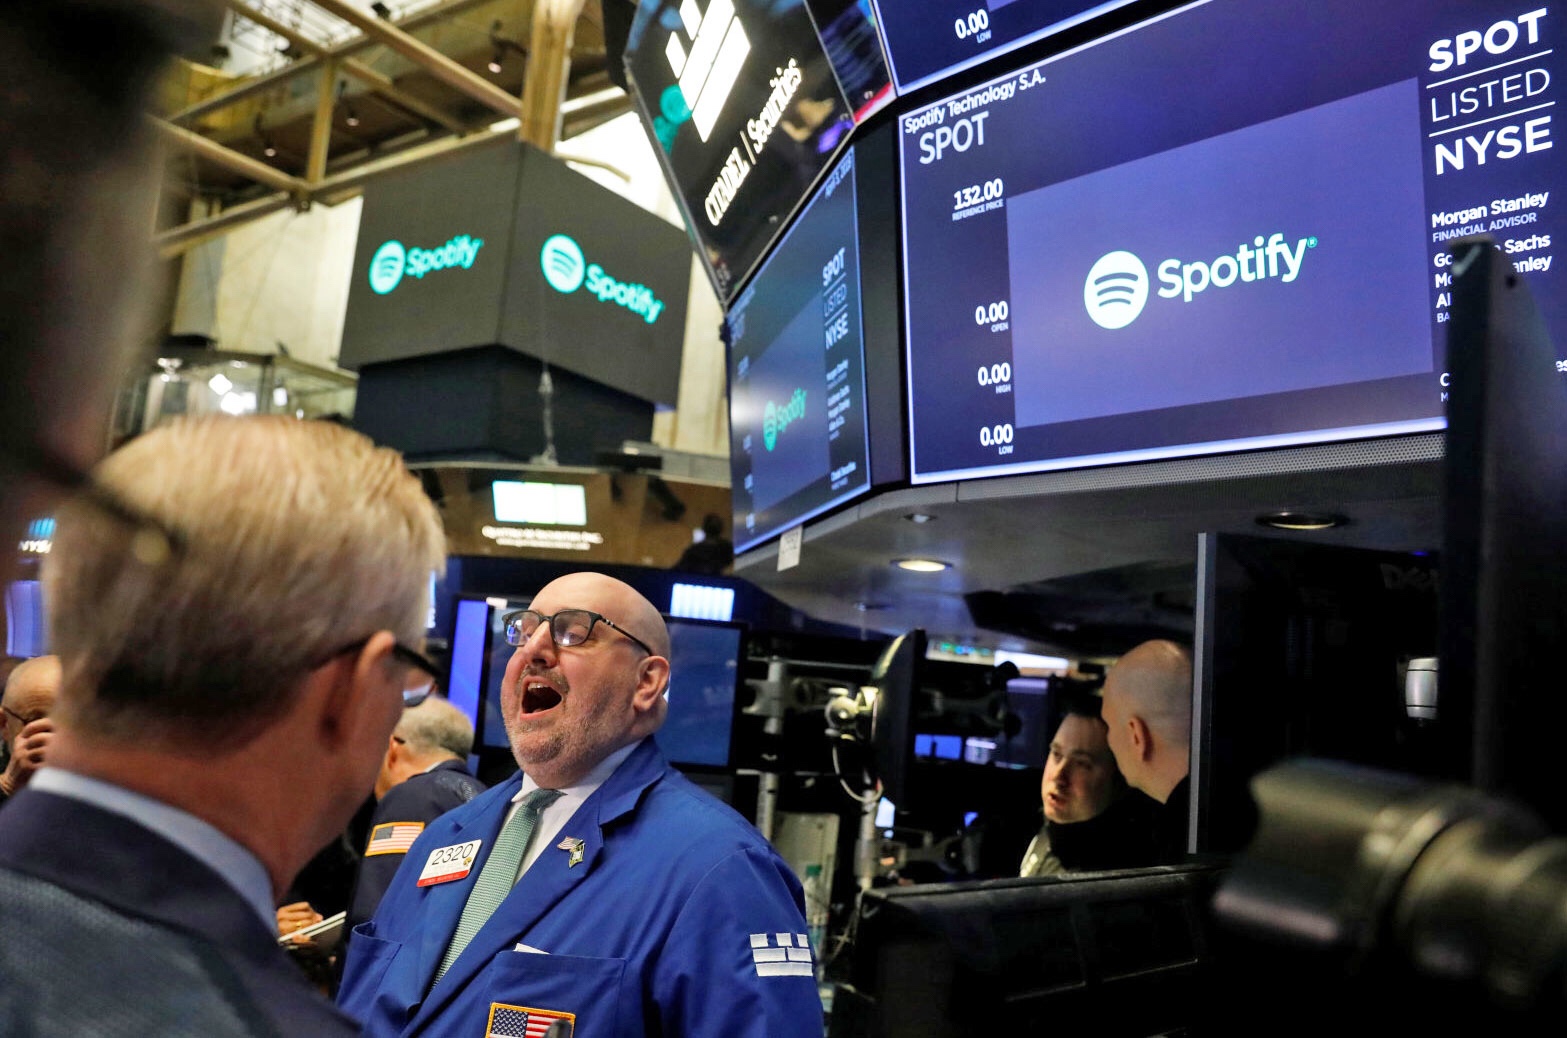 Spotify is now a public company